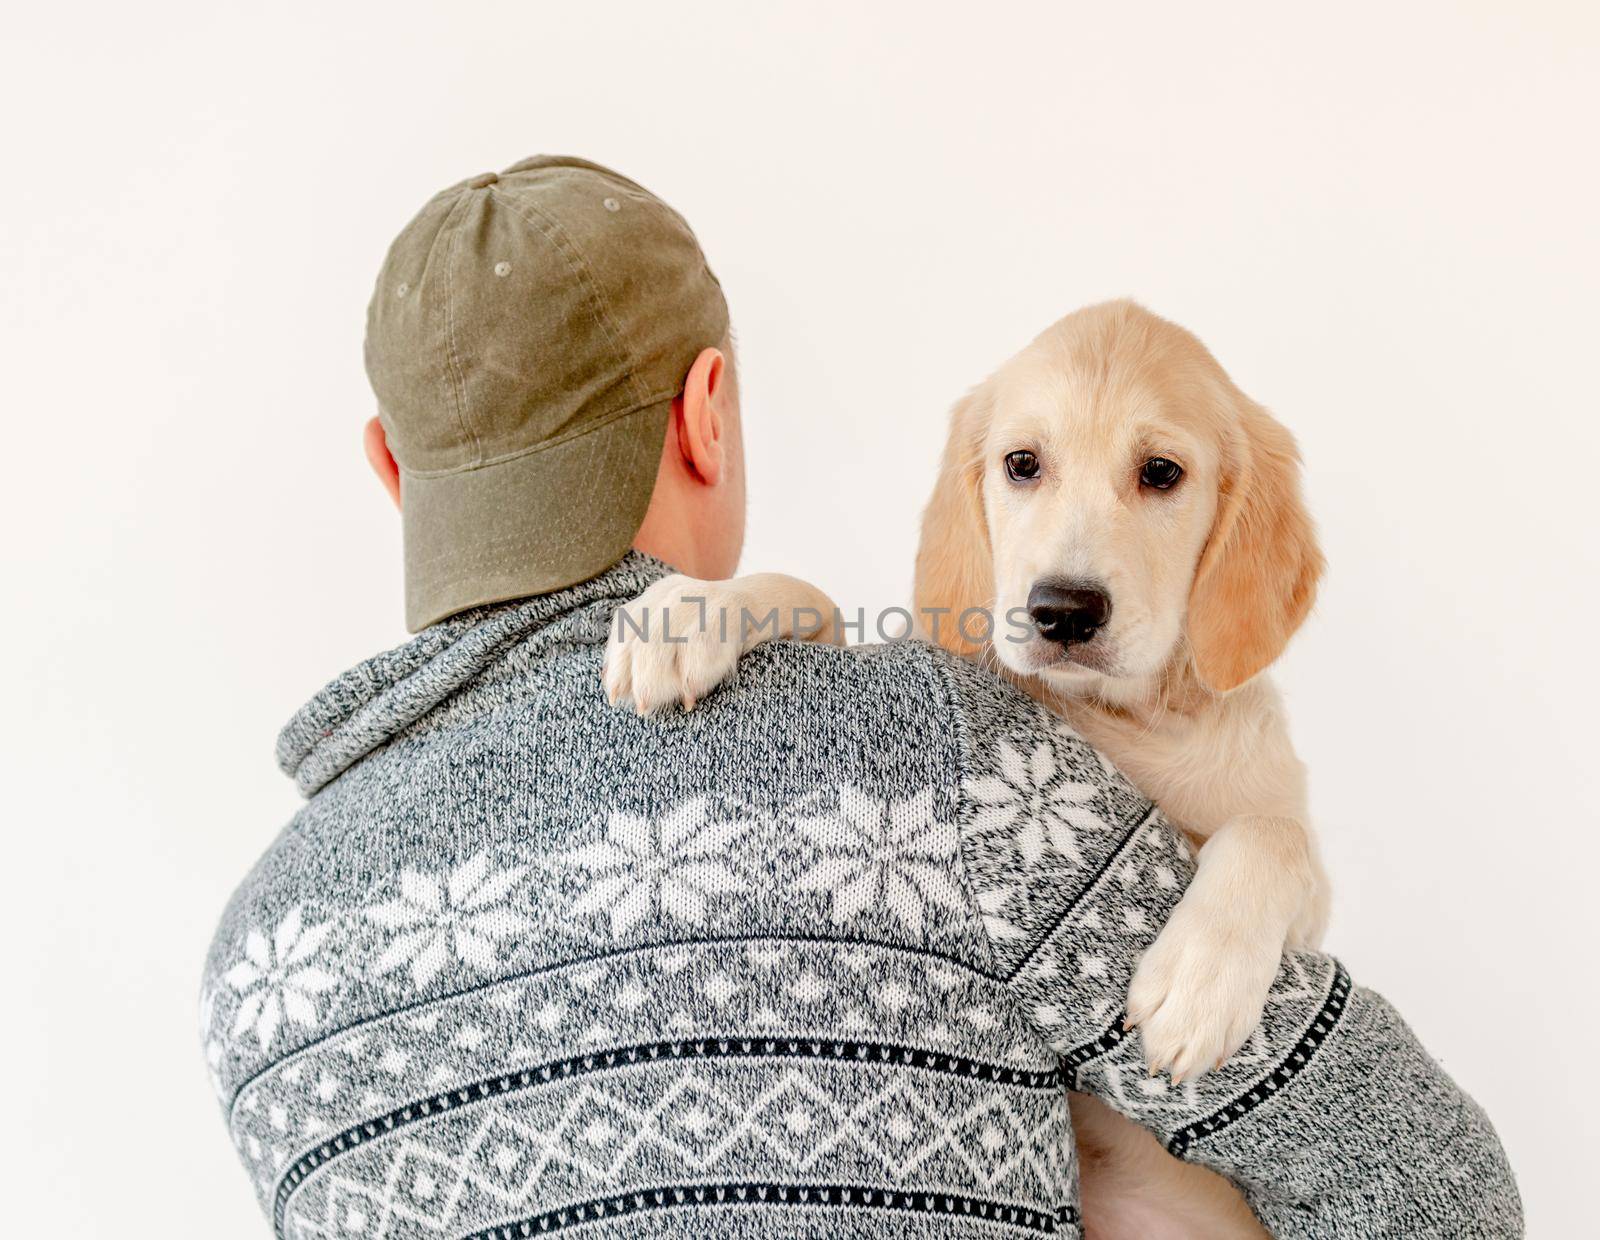 Back view of man holding lovely young dog